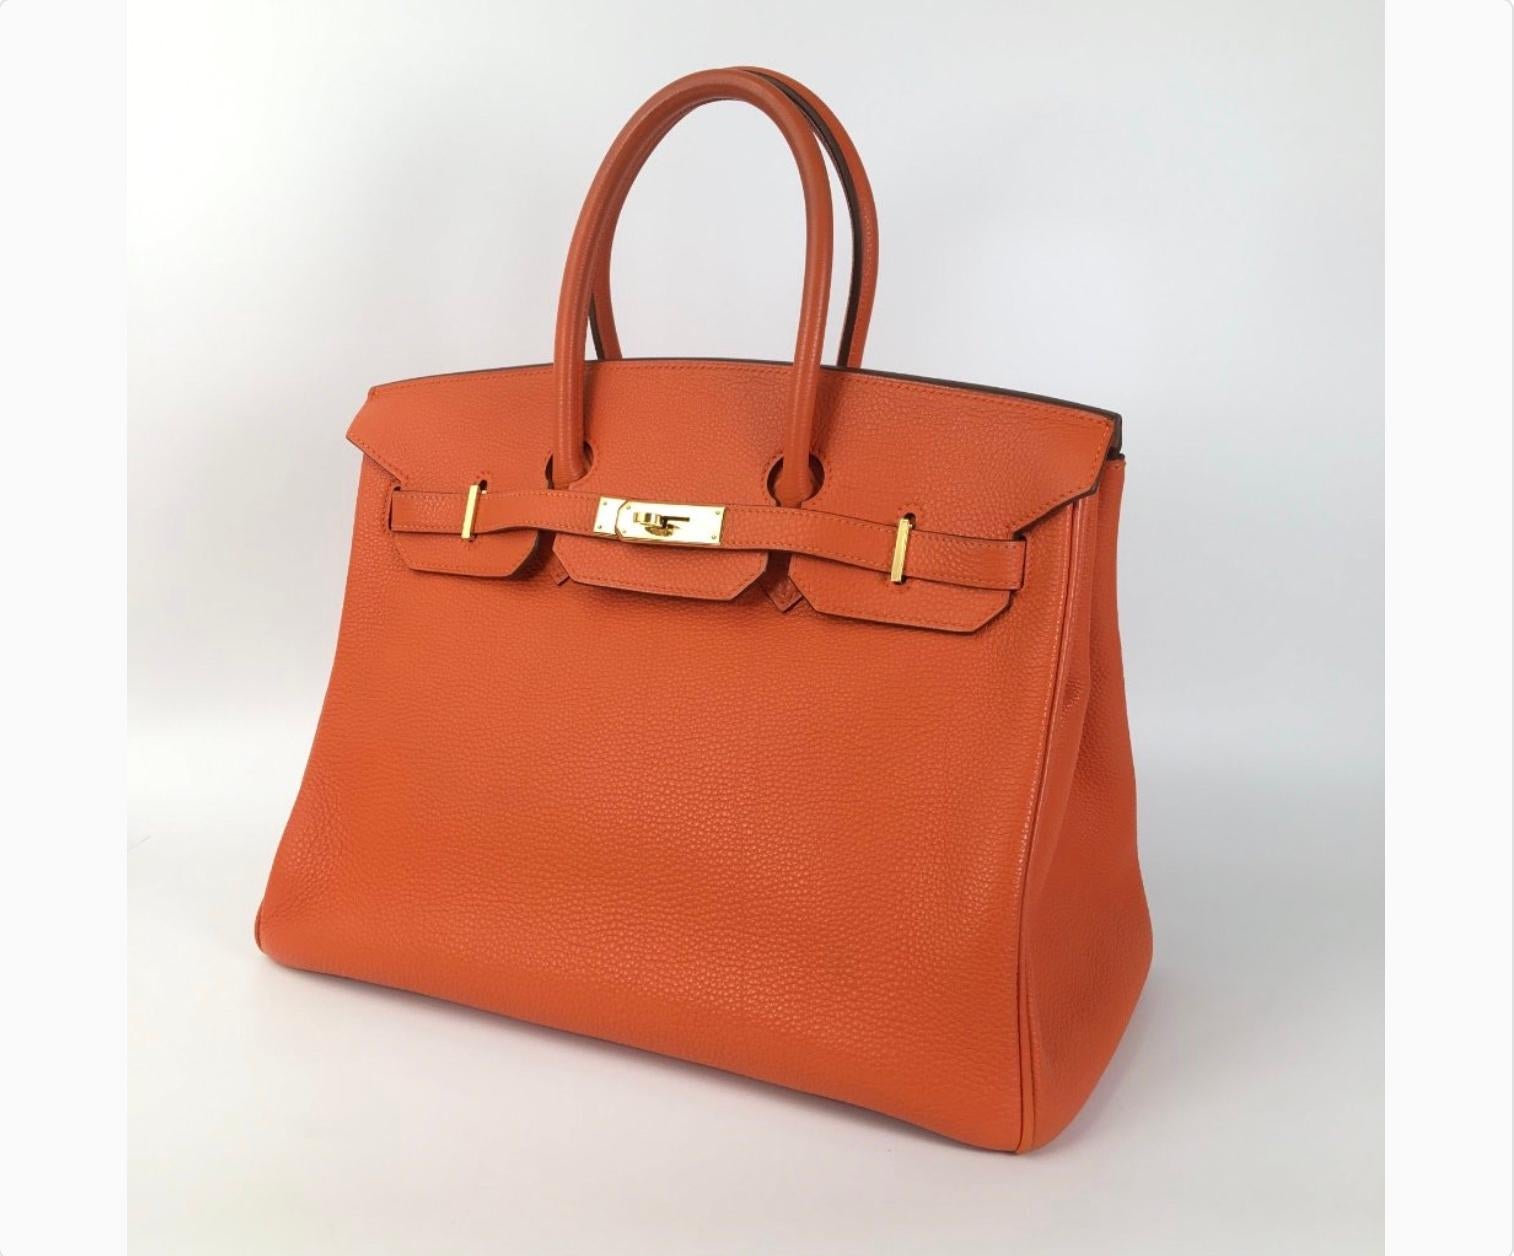 Hermes Birkin 35
Hardware
Gold
Material
Togo
Condition
8.5/10 (decent condition)
Color
Orange
Style
Top Handle
Everyday
Collection
New Arrivals
Casual
Travel
Includes
Dust Bag, Lock and Key, Clochette
Size
35
H Square Stamp - 2004